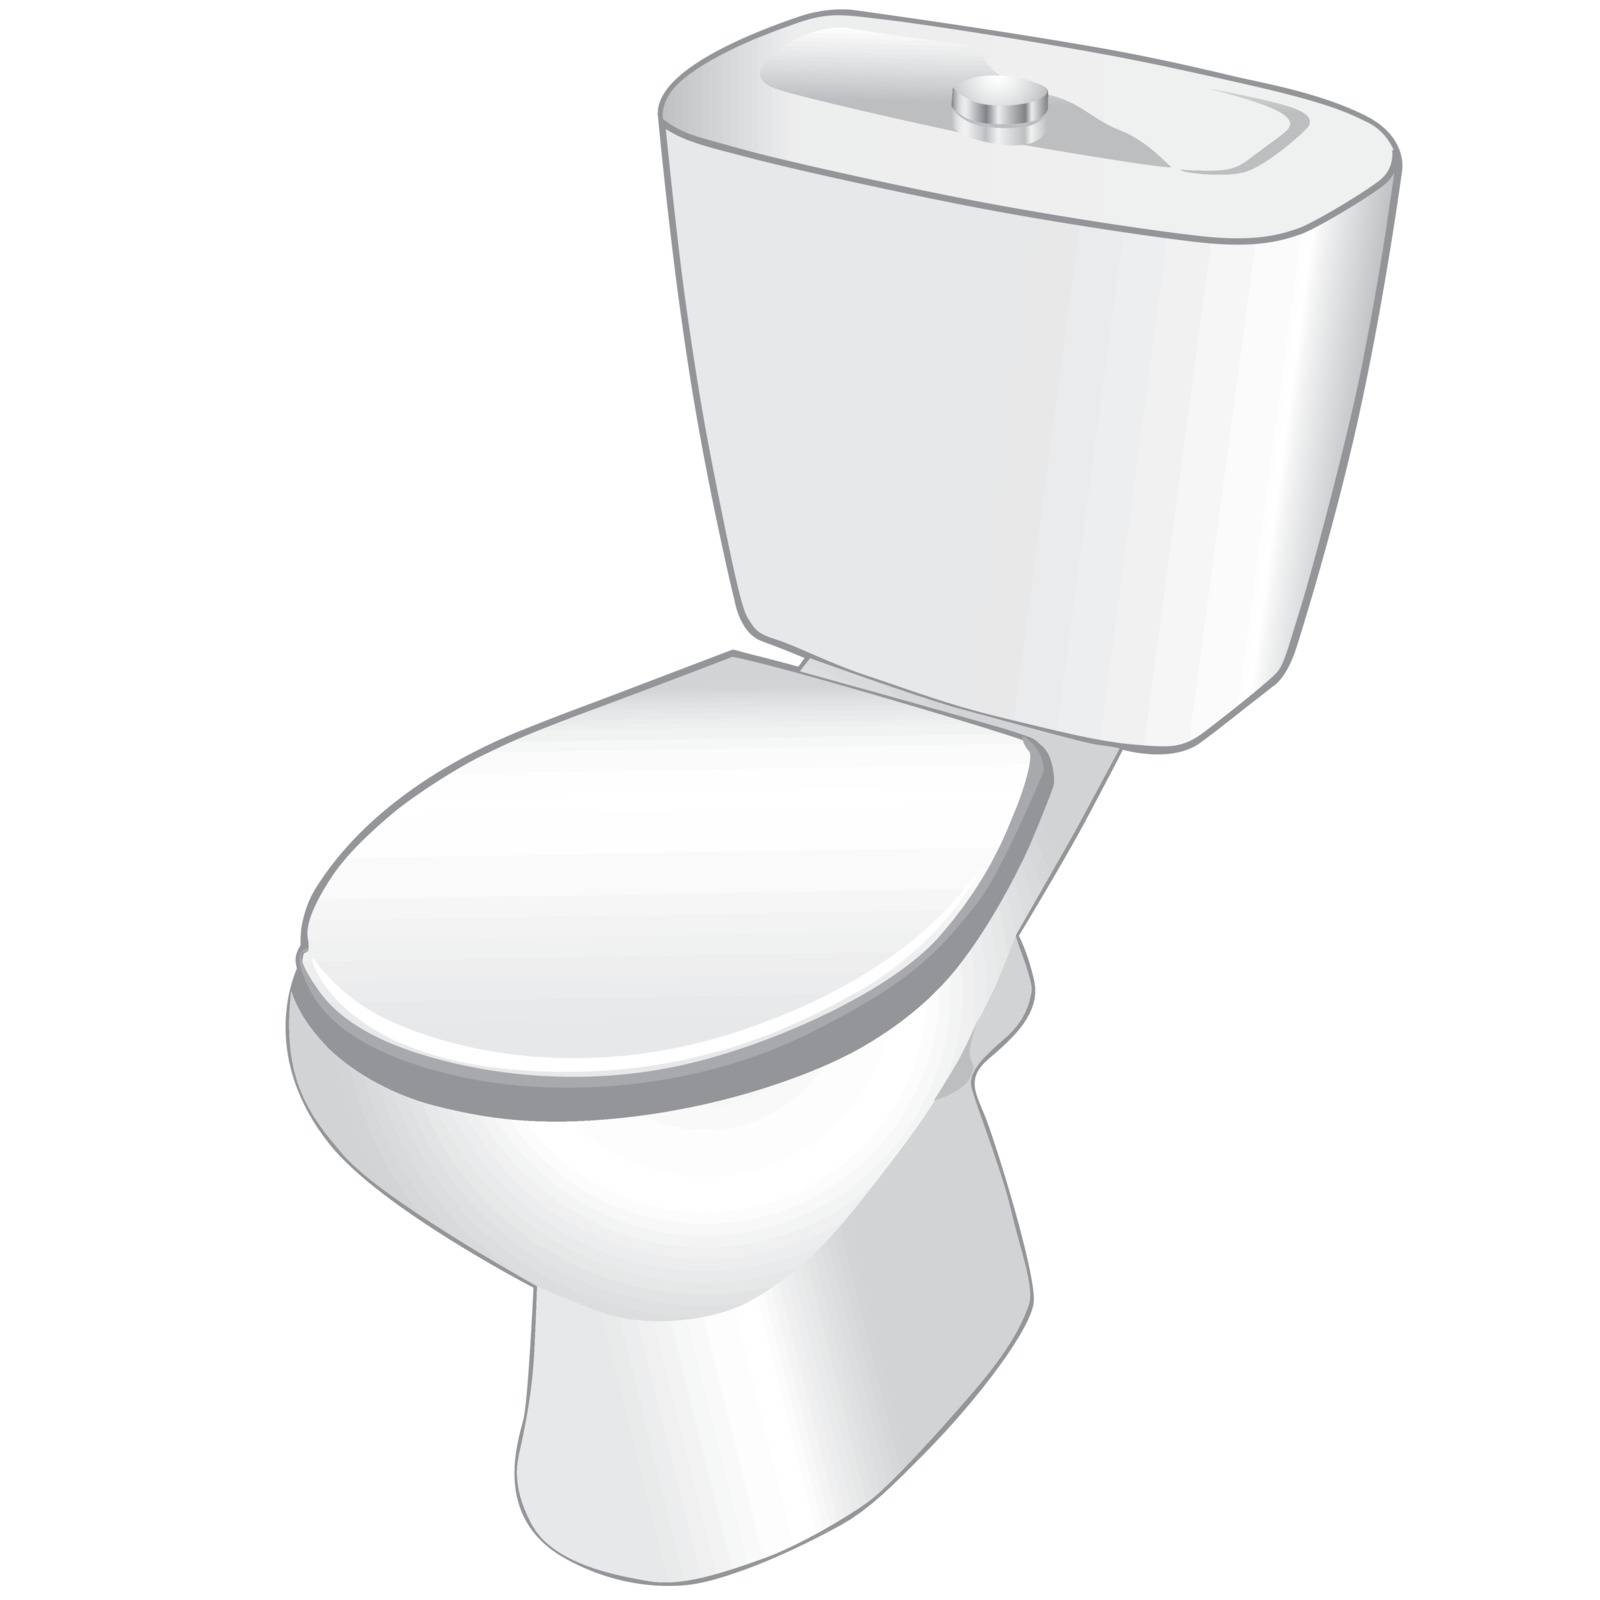 Toilet - Colored Illustration, Vector